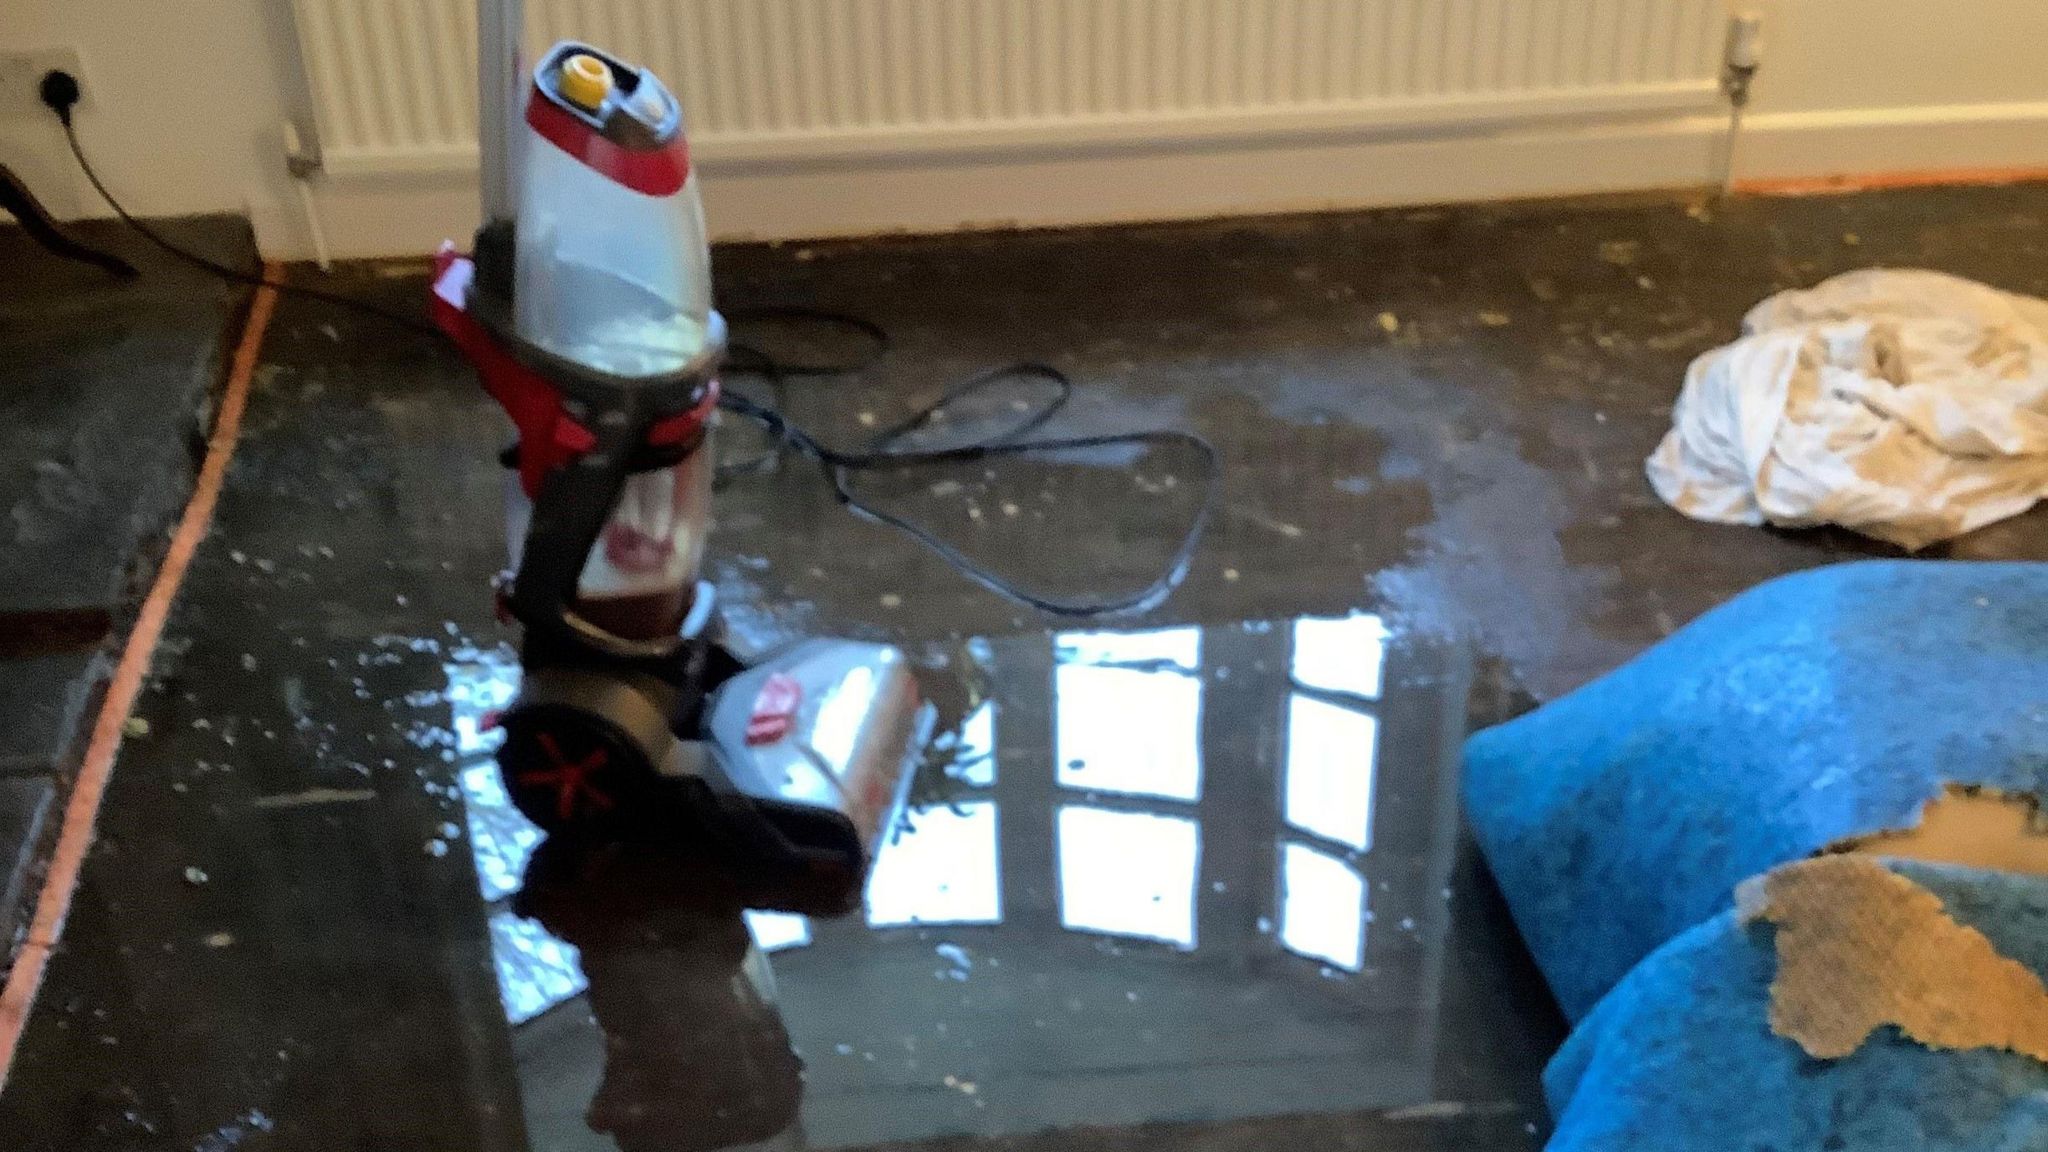 Flood waters in Simon's home showing a soaked carpet